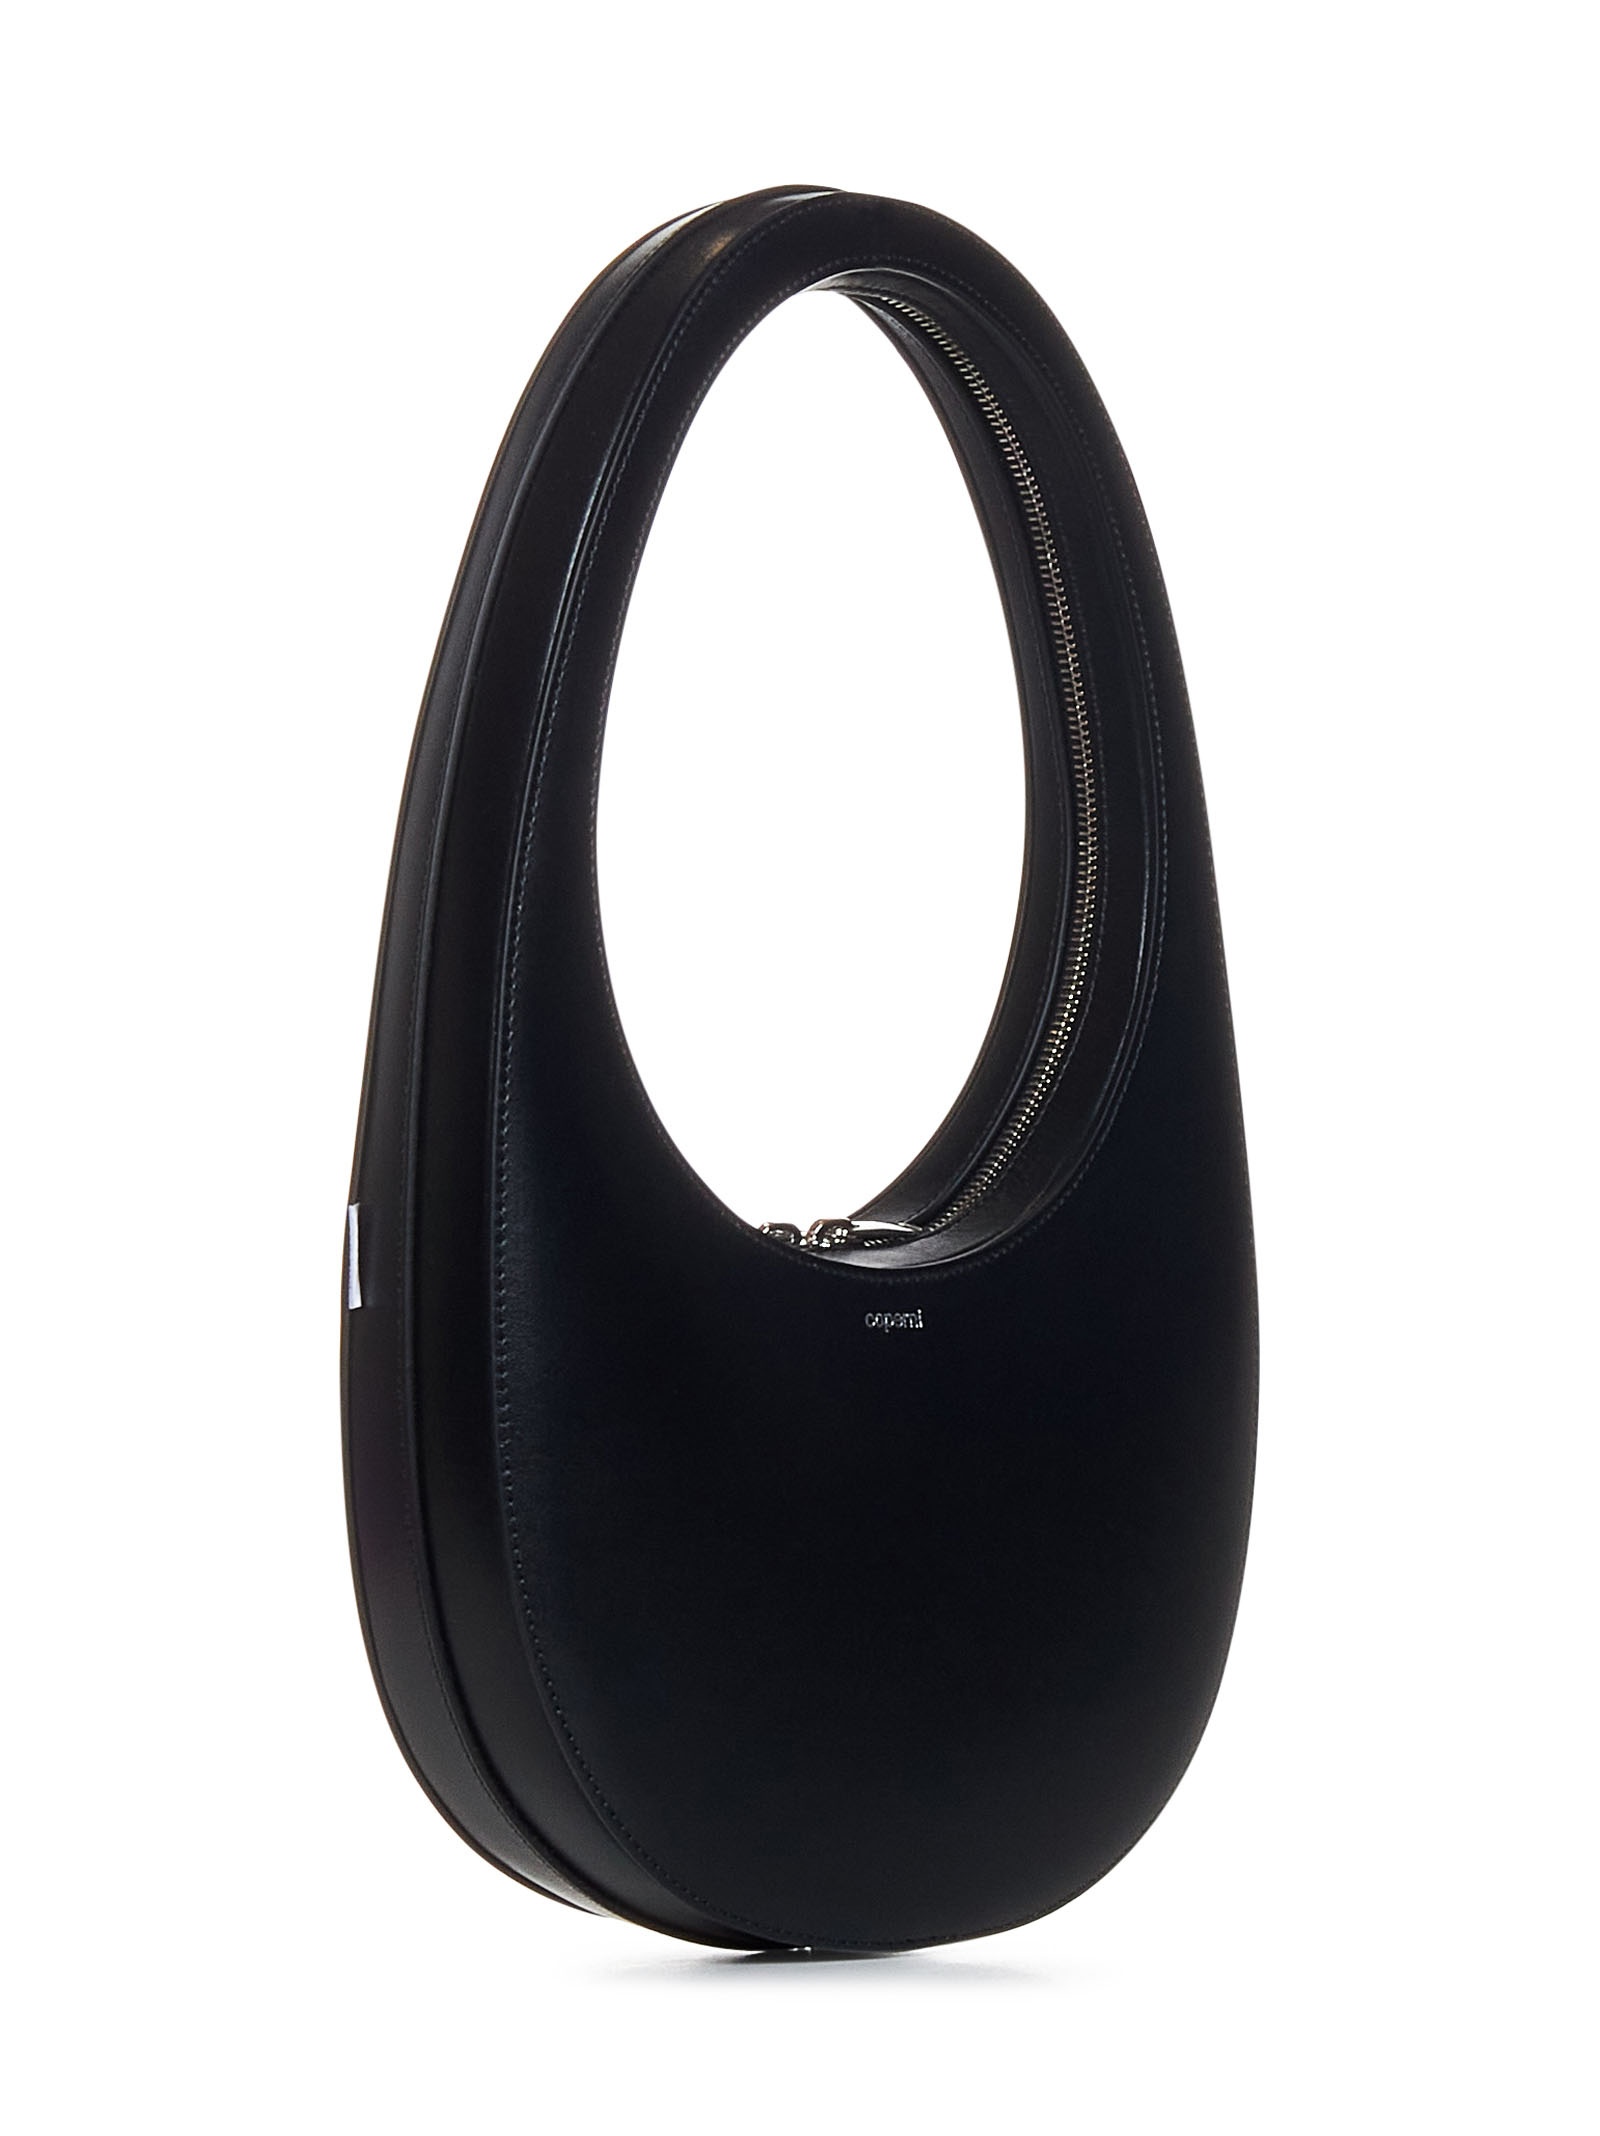 Oval handbag in black leather with silver logo print on the front. - 2